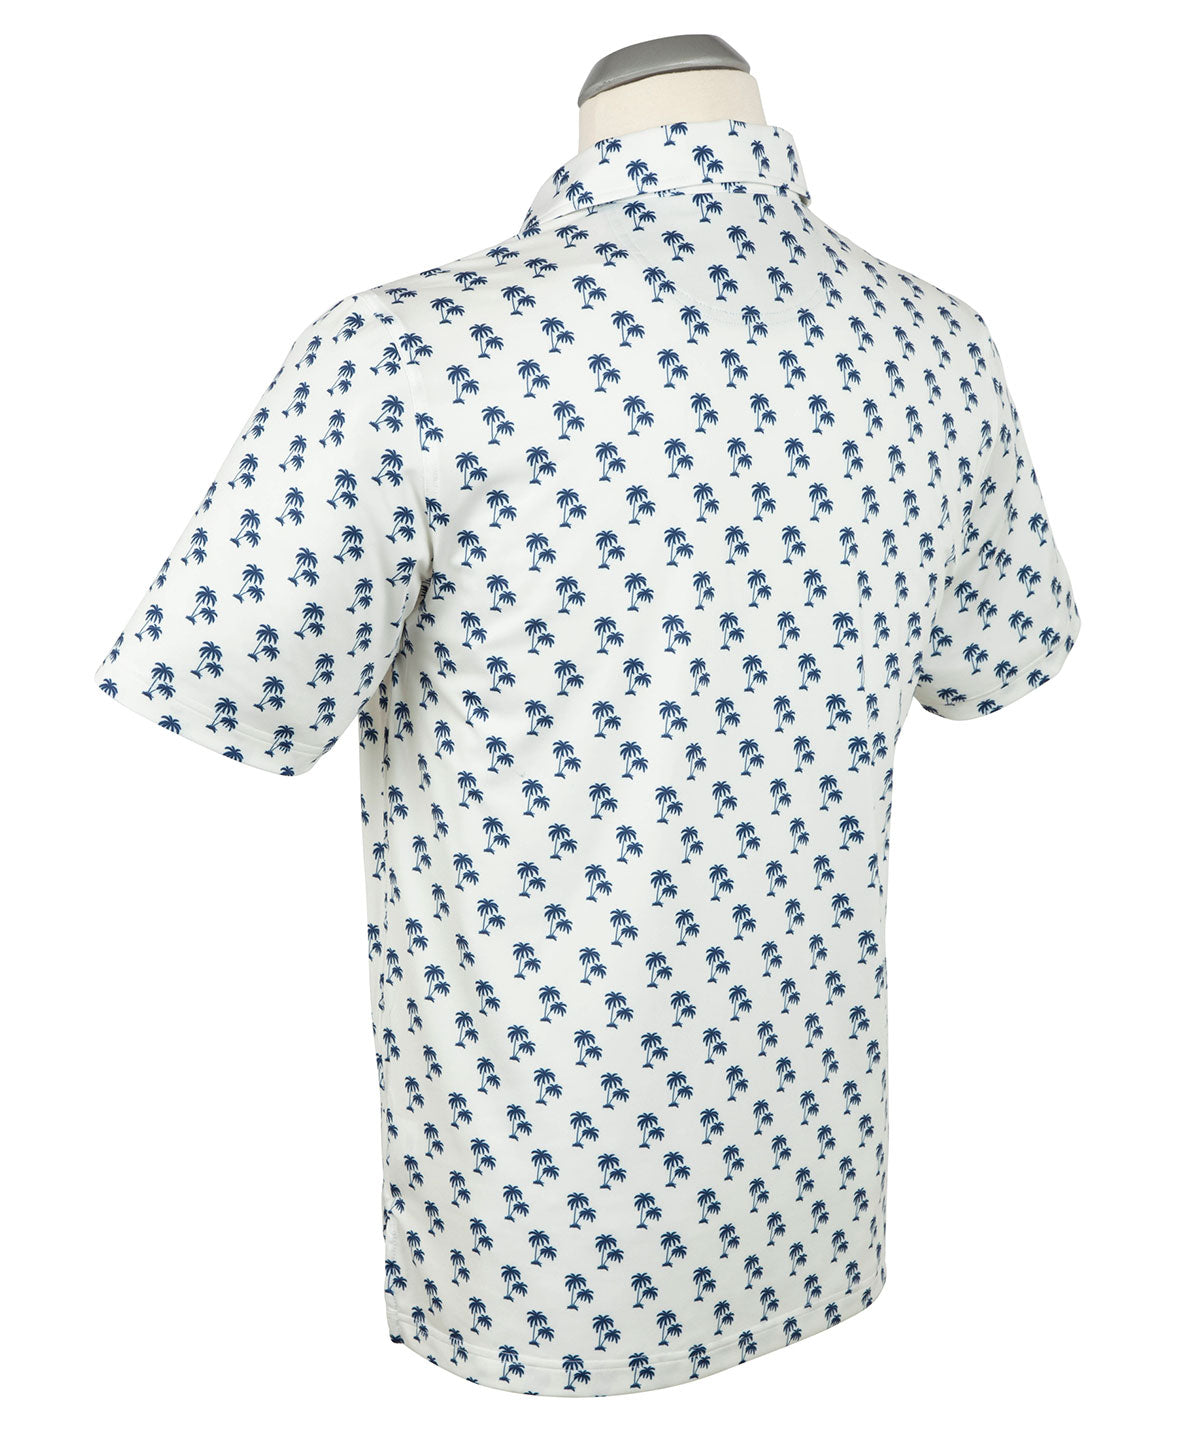 The Business Lunch - Men's Palm Tree Golf Shirt by Kenny Flowers